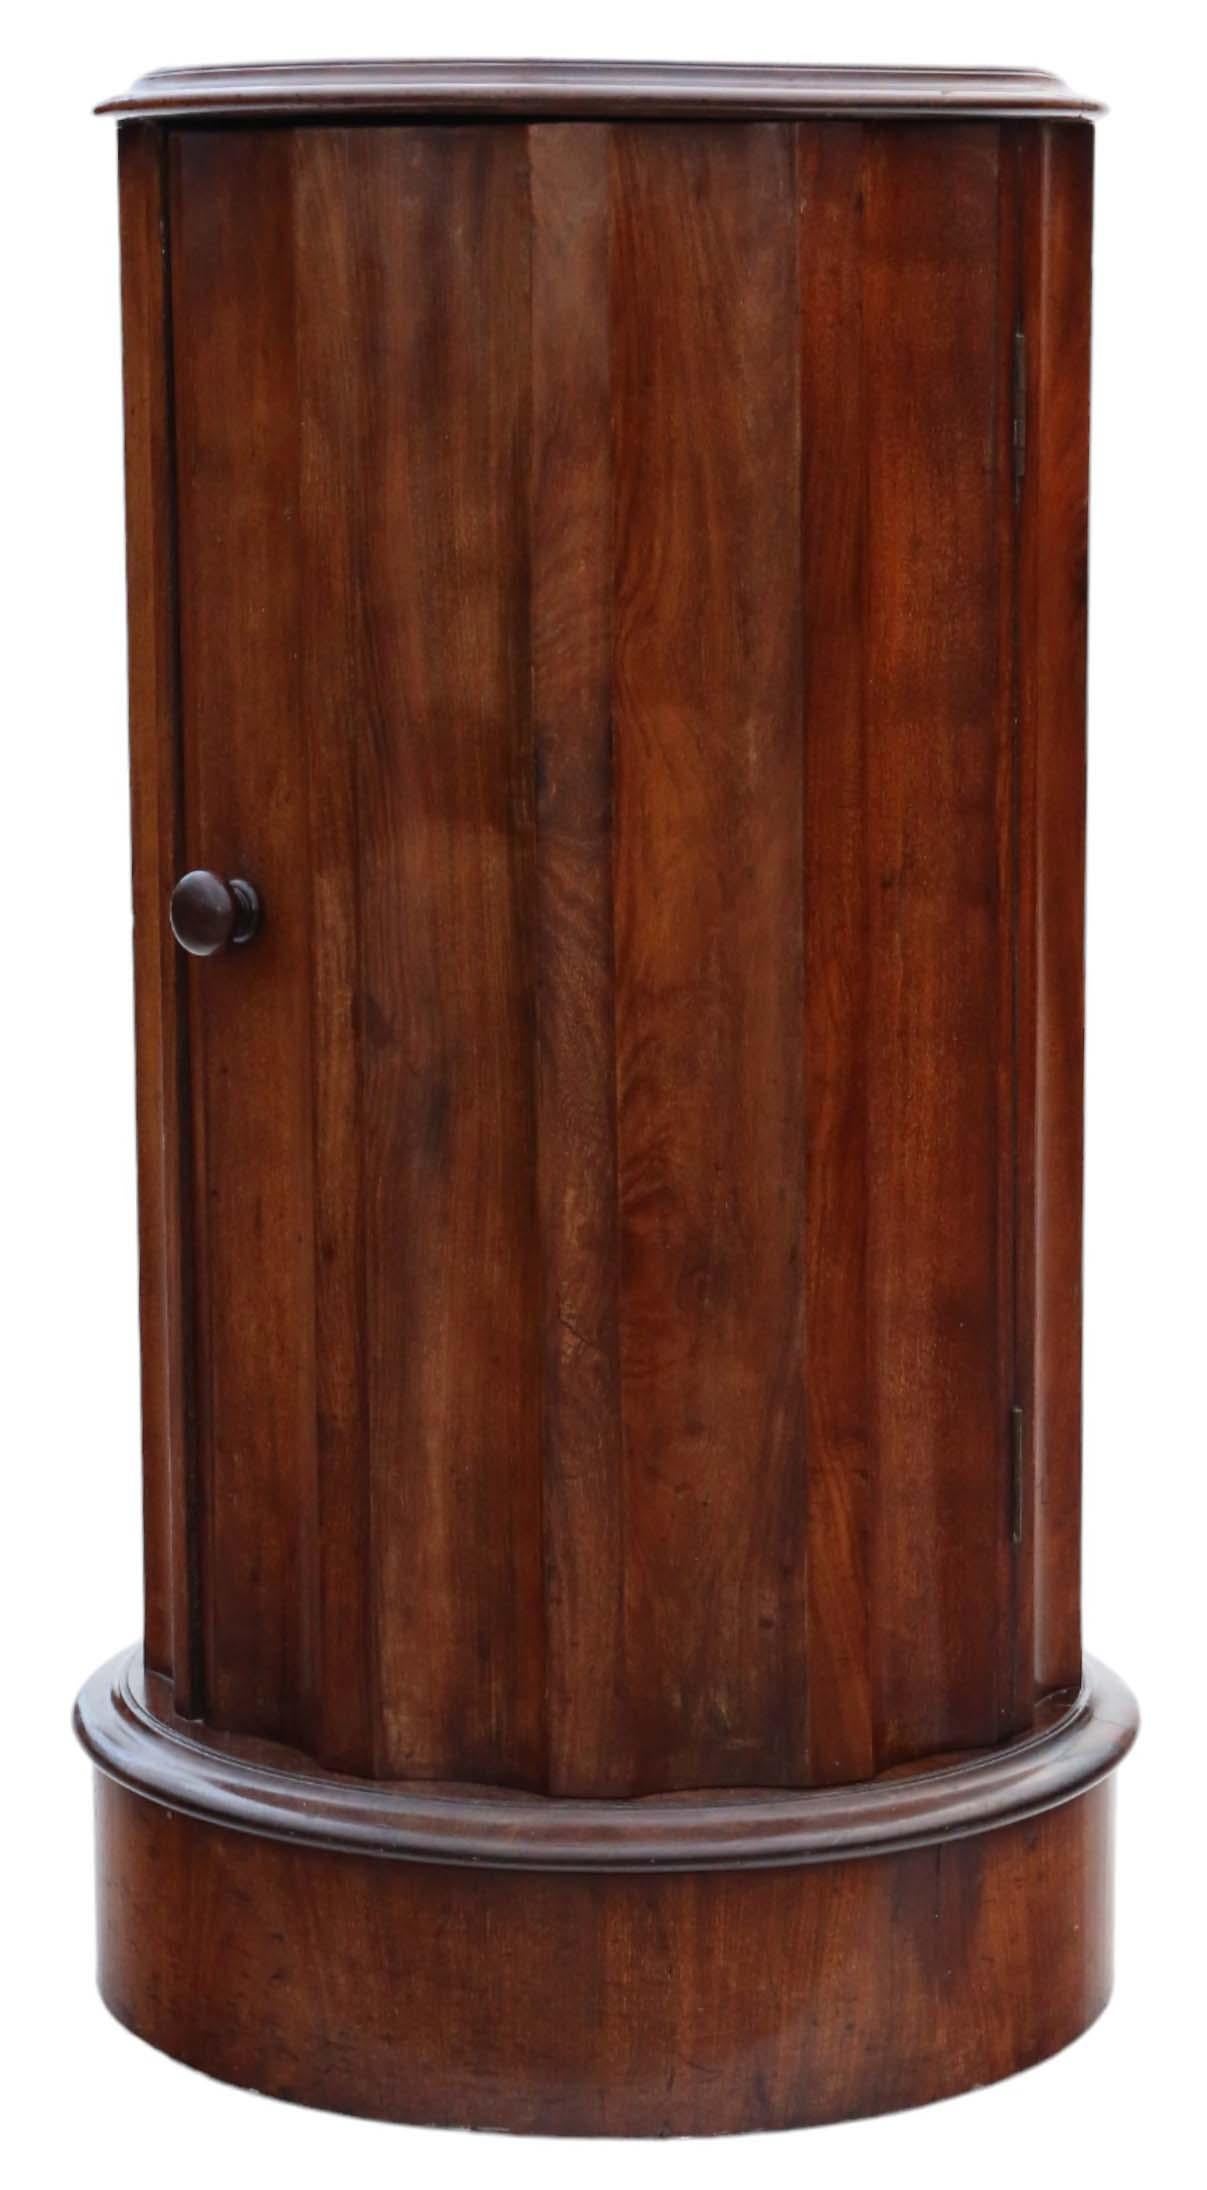 Antique 19th Century Victorian mahogany fluted cylinder bedside cupboard table cabinet of fine quality.

This cupboard is a delightful piece rich in age, charm, and character, known for its rarity and scarcity in the market.

Notably heavy and